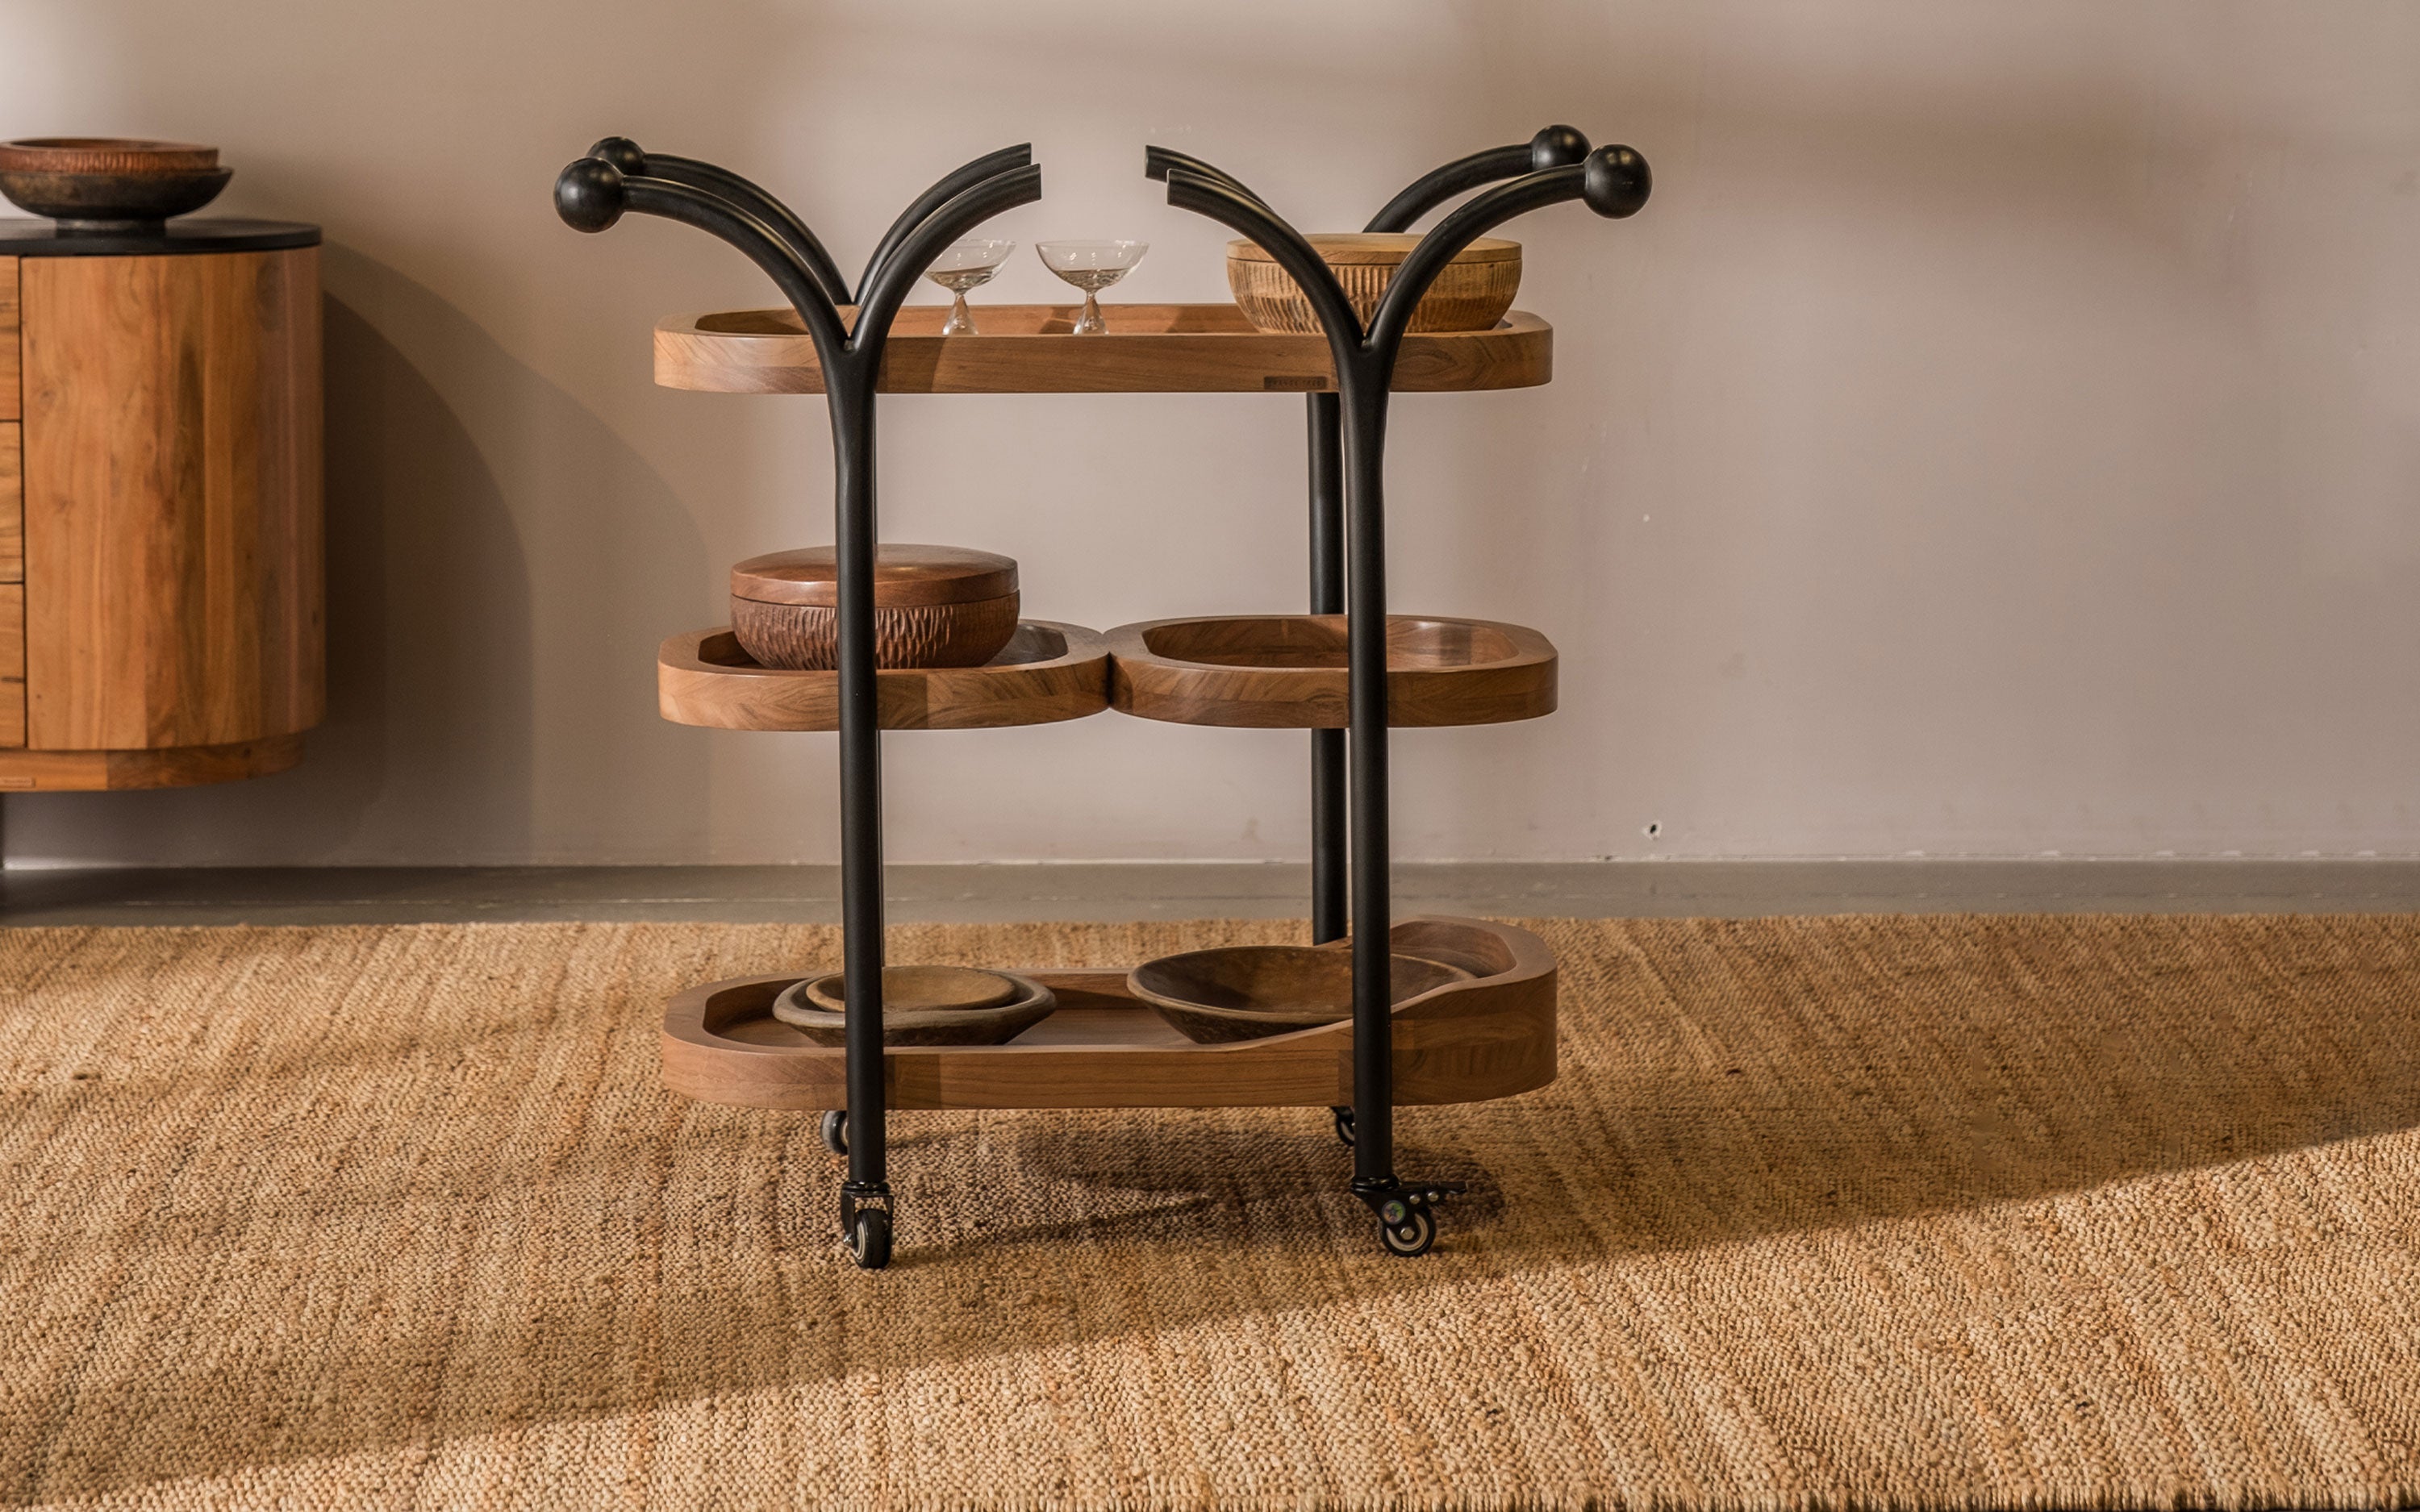 A natural wooden service trolley with multiple shelves and wheels, ideal for use in home bar settings